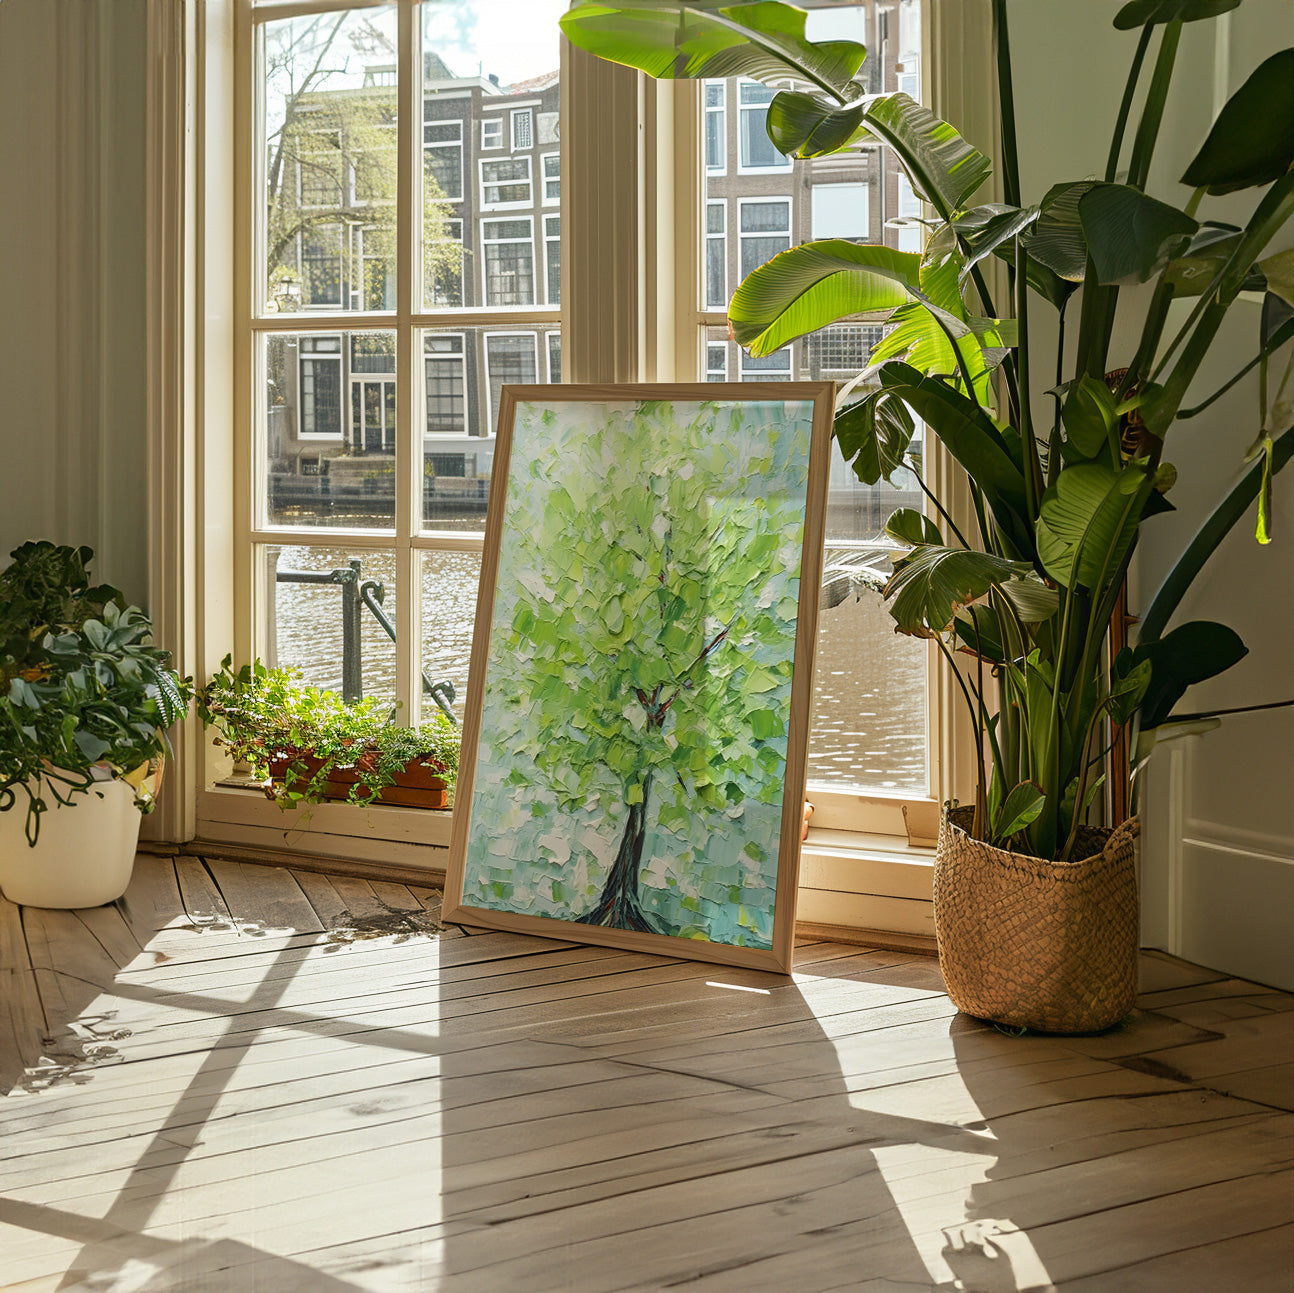 A painting of a tree leaning against a window with canal view, sunlight casting shadows on the floor.